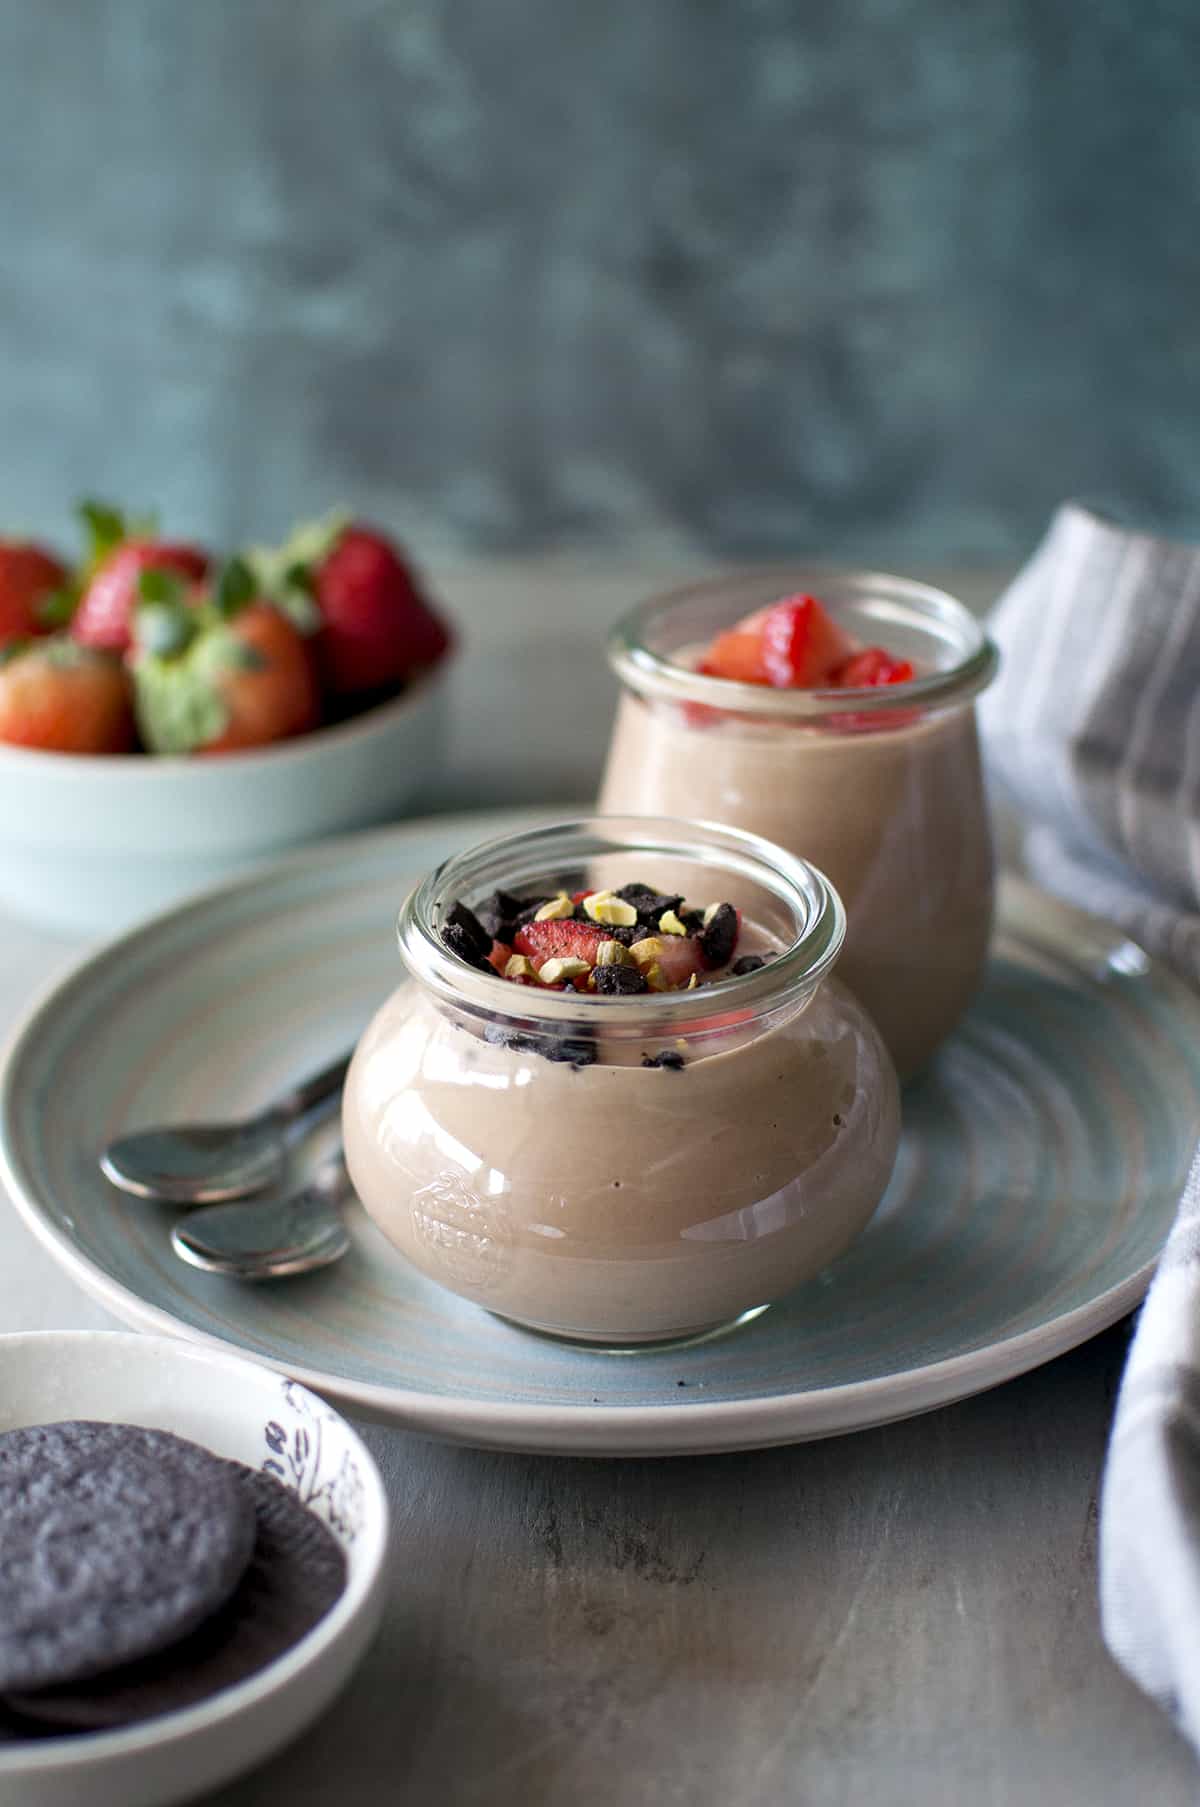 Chocolate custard topped with chopped berries, crushed cookies and nuts in a glass bottle